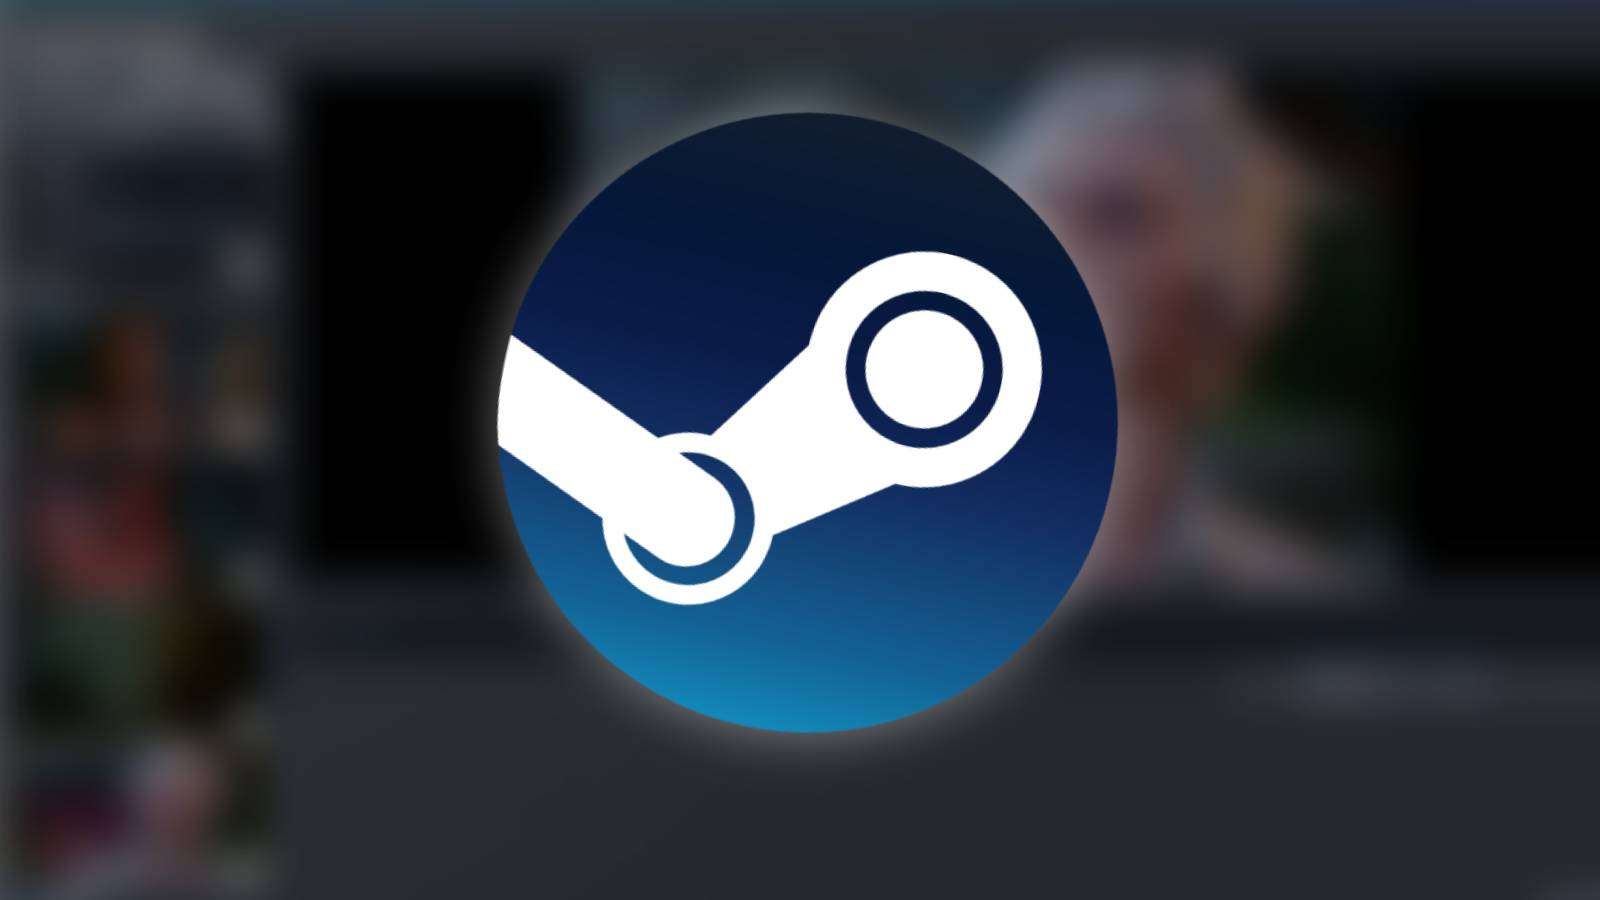 Image of the Steam logo on a blurred screenshot of the Steam Screenshot Manager.